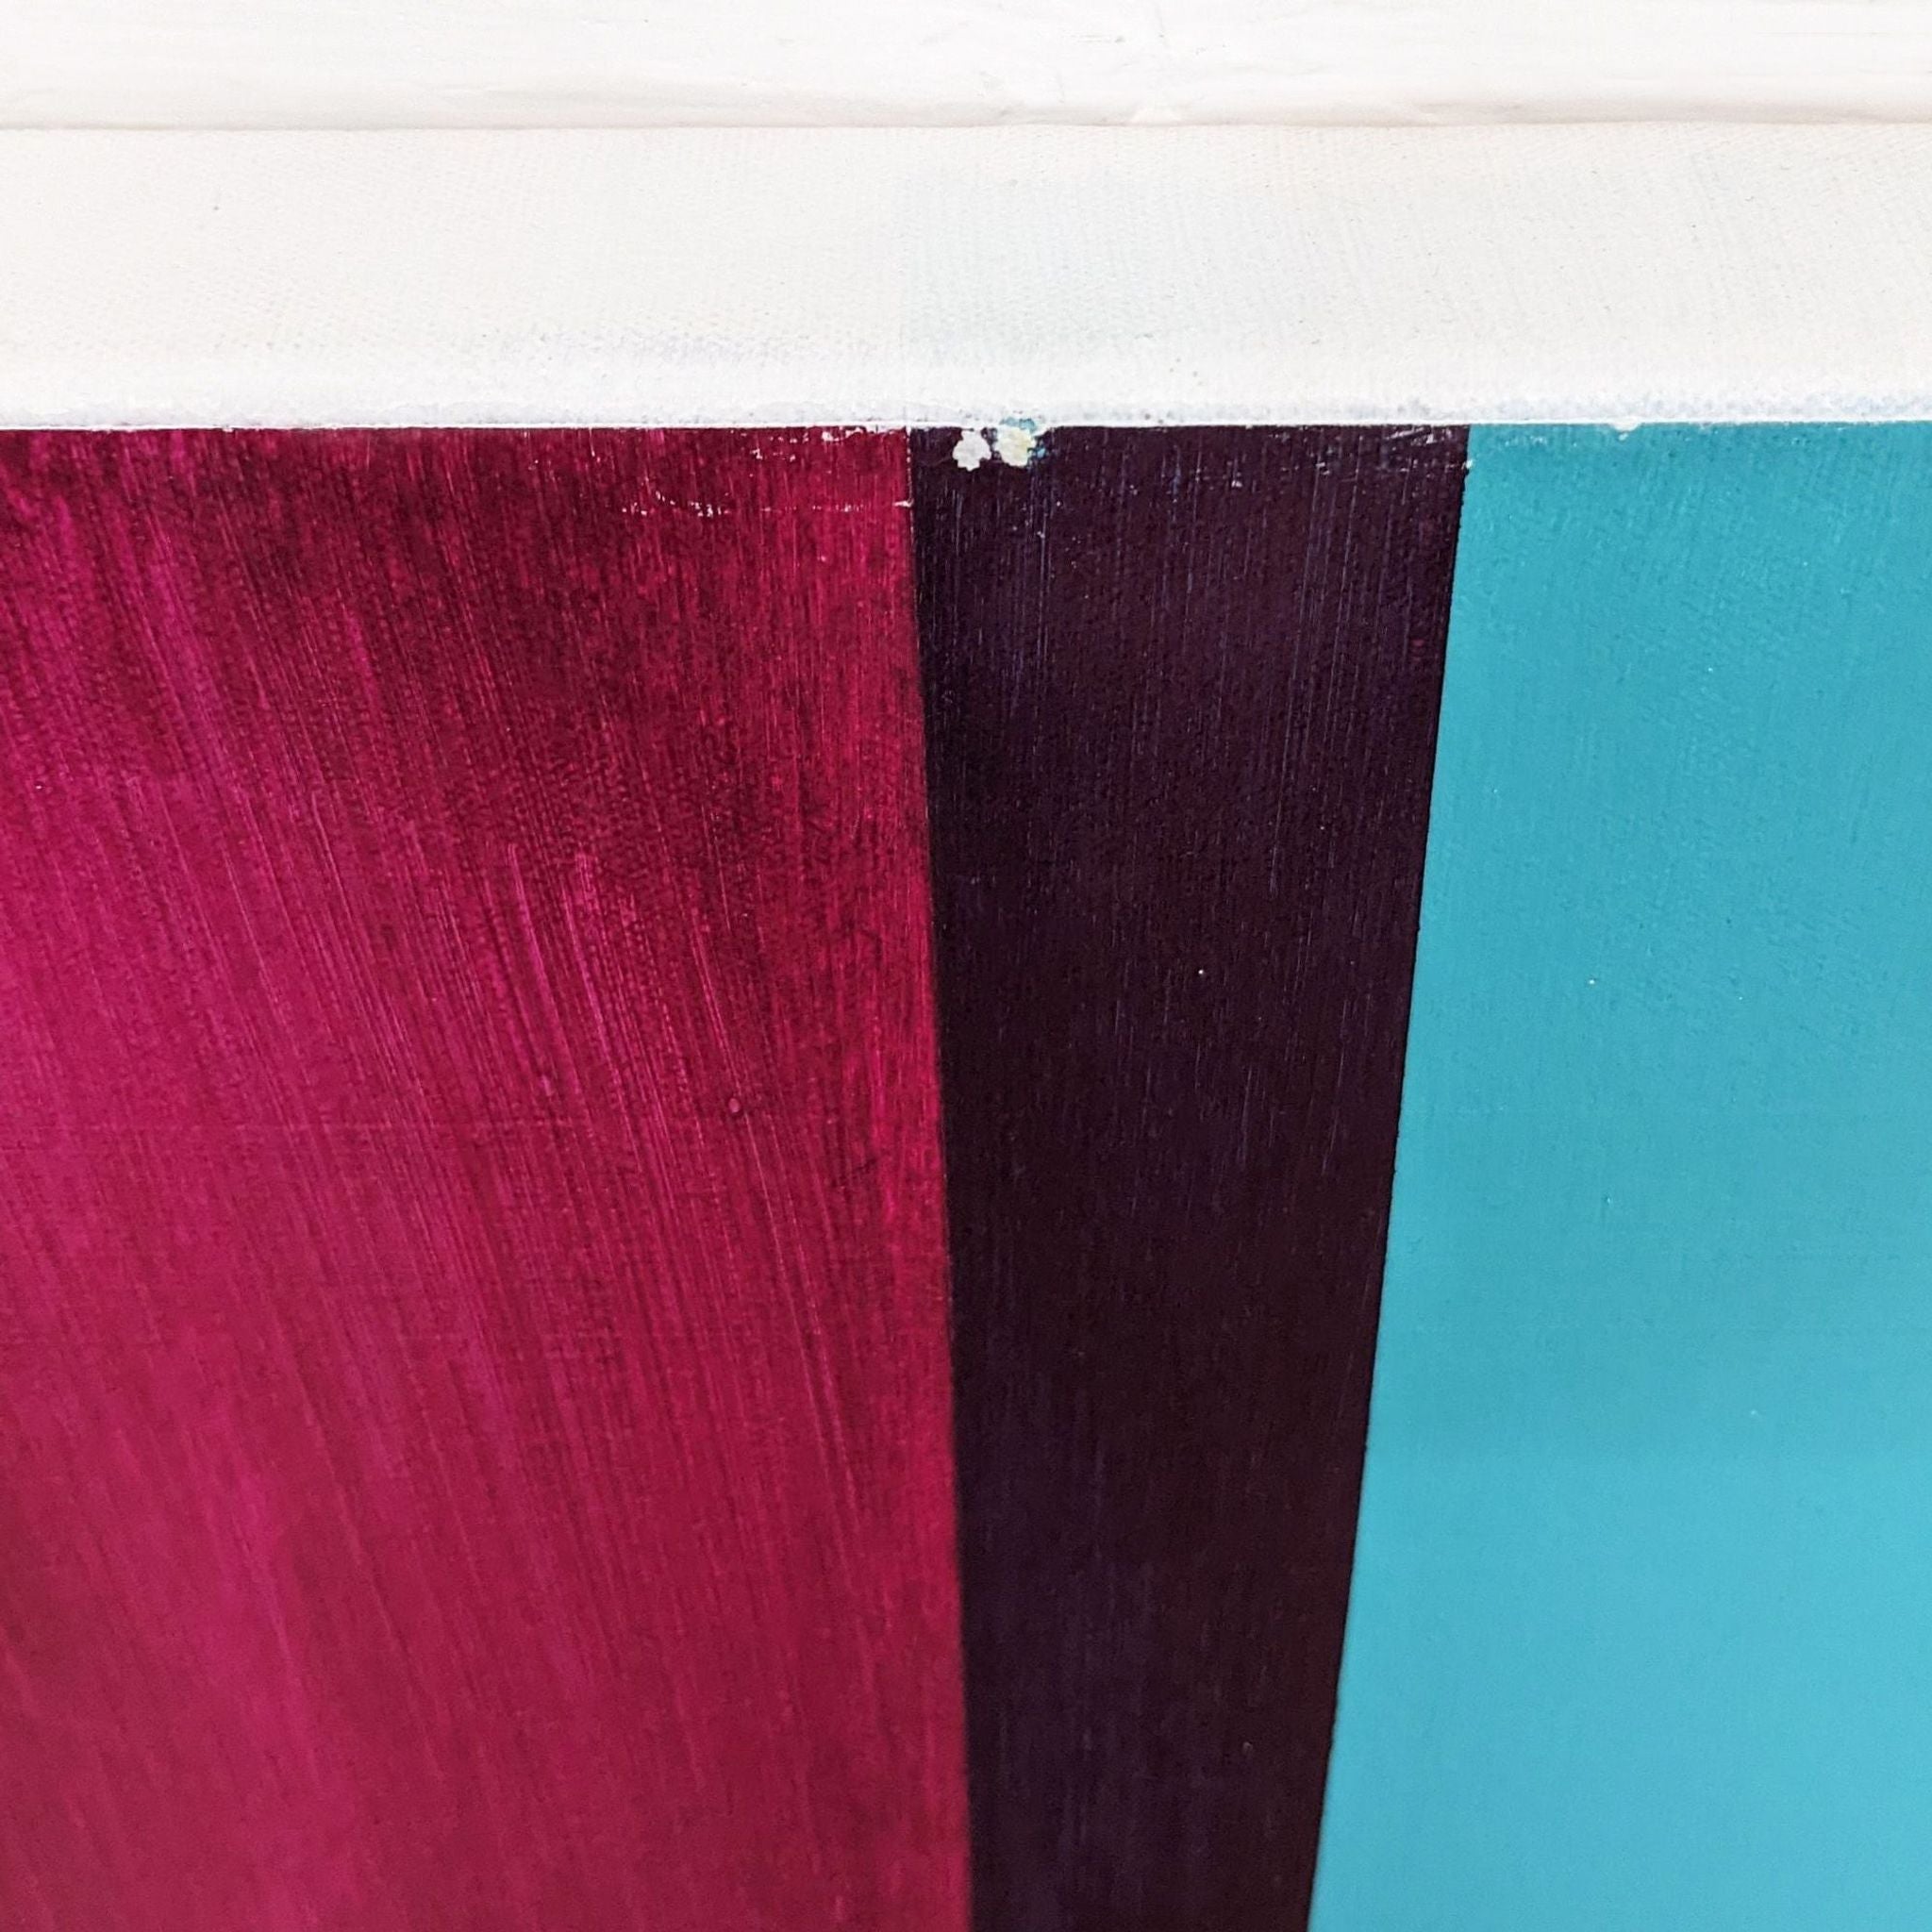 Close-up of a Reperch modern art painting showing detailed texture where deep burgundy meets vibrant teal against white.